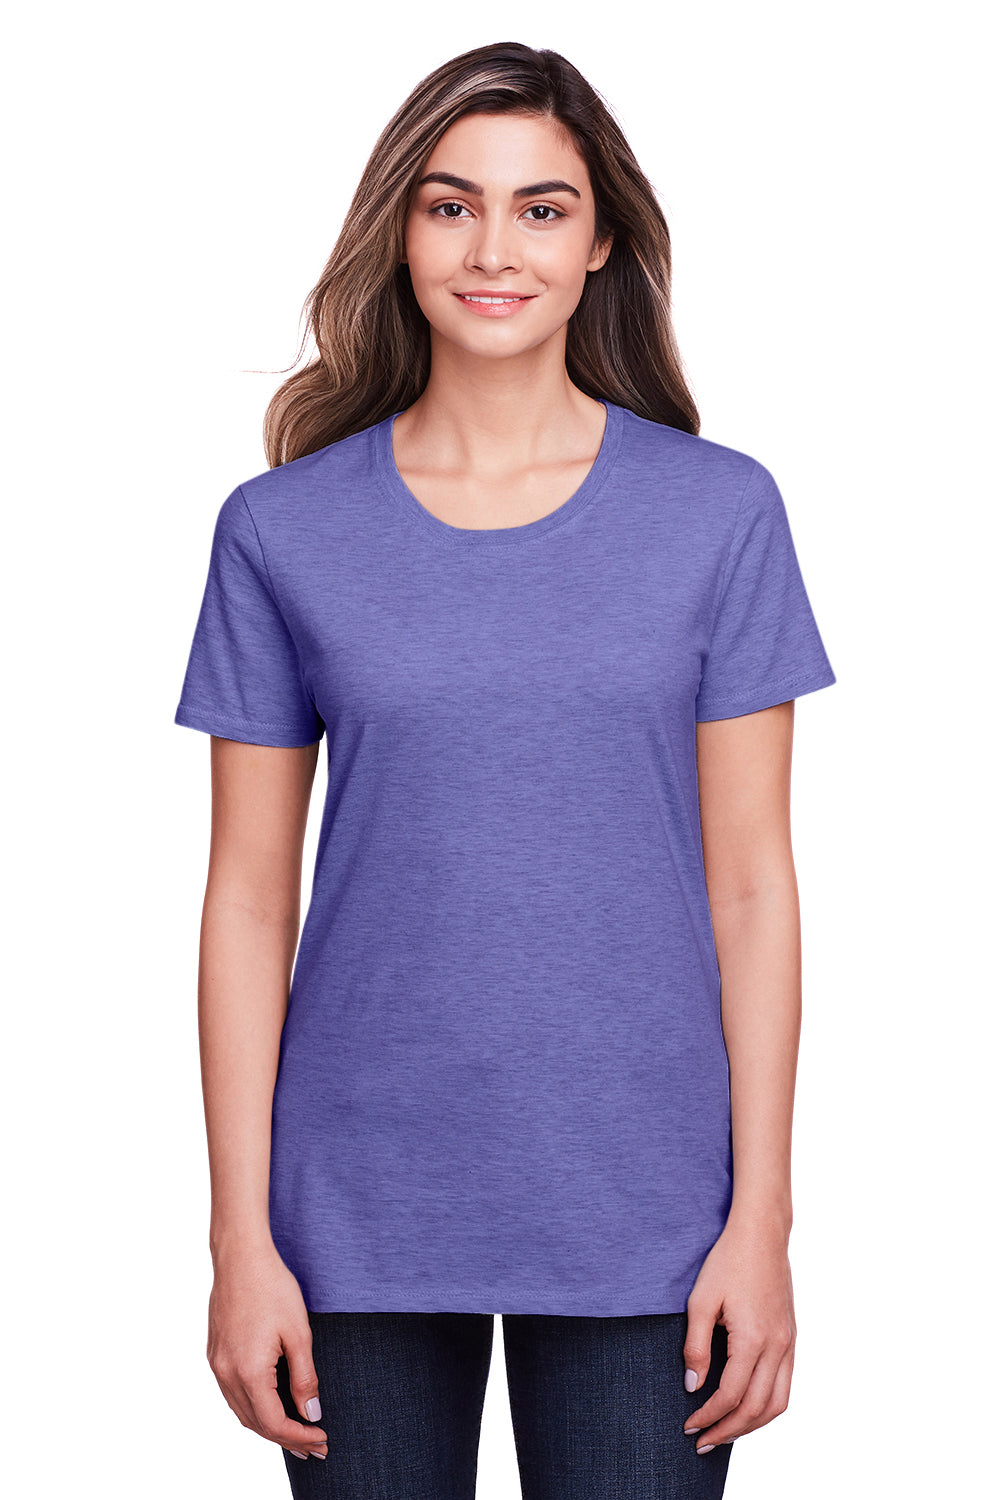 Fruit Of The Loom IC47WR Womens Iconic Short Sleeve Crewneck T-Shirt Heather Purple Front